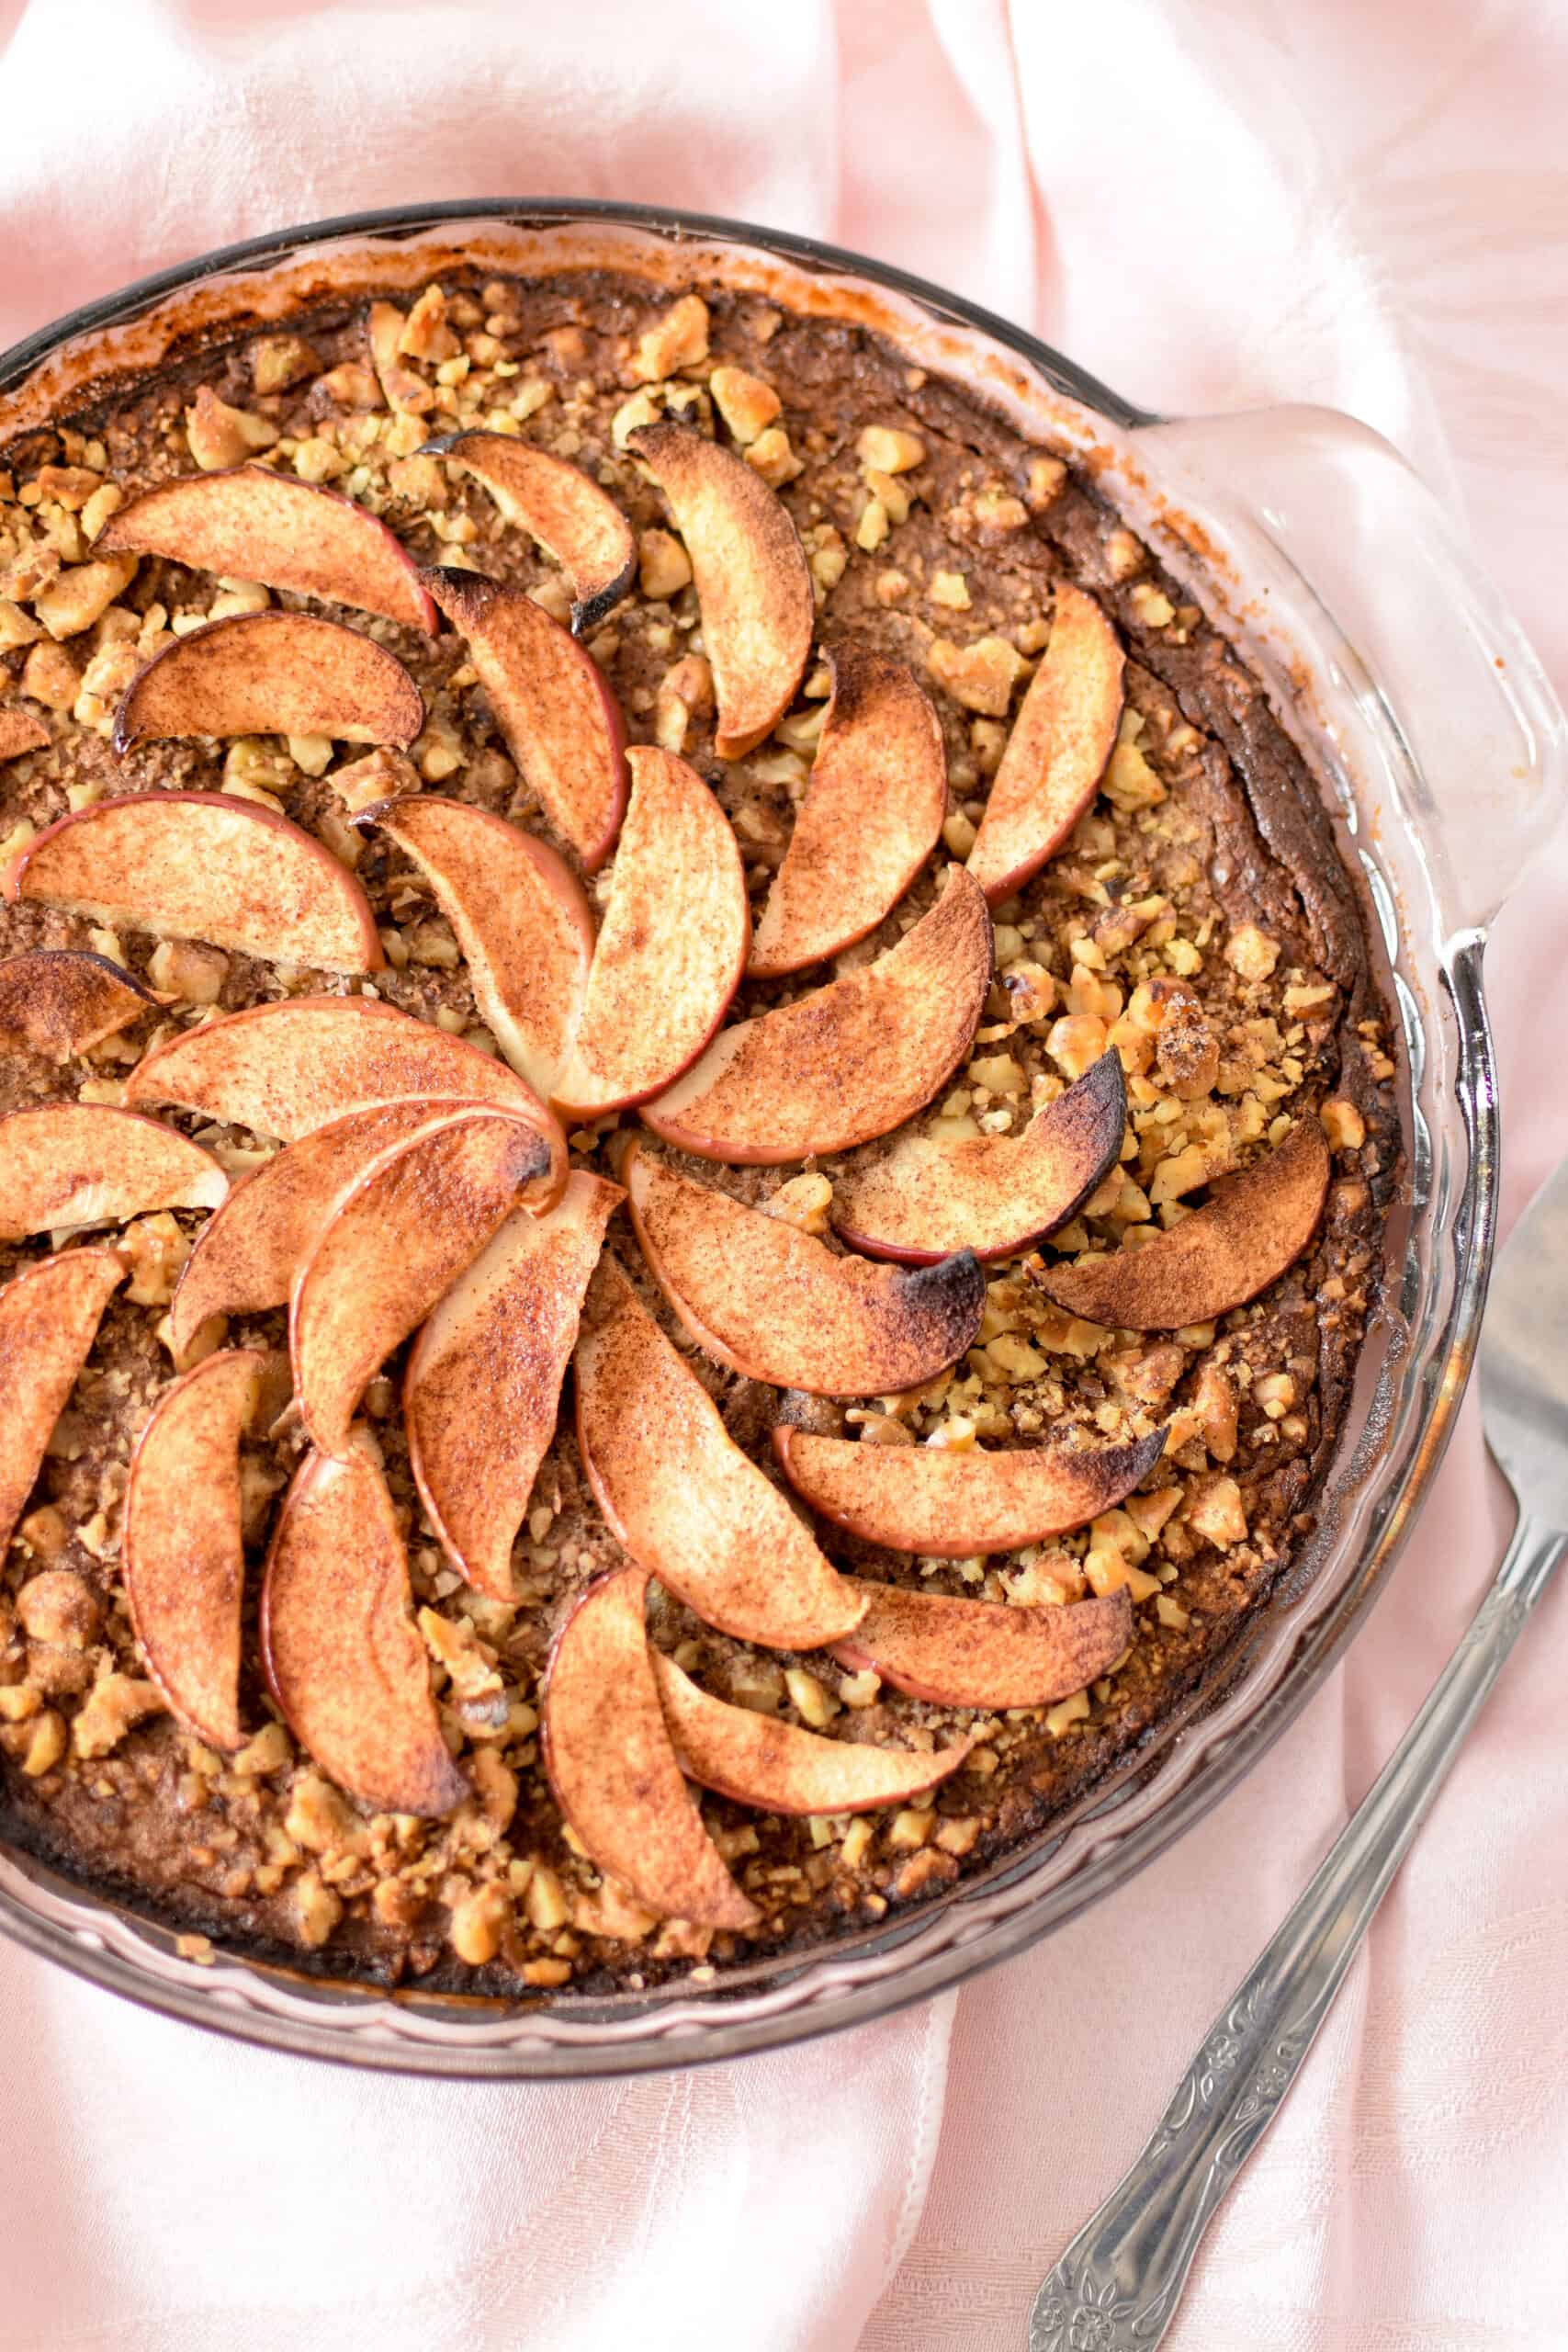 Spice up your breakfast routine with this simple. whole-food, nutrient dense Apple & Cinnamon Baked Oatmeal Cake!